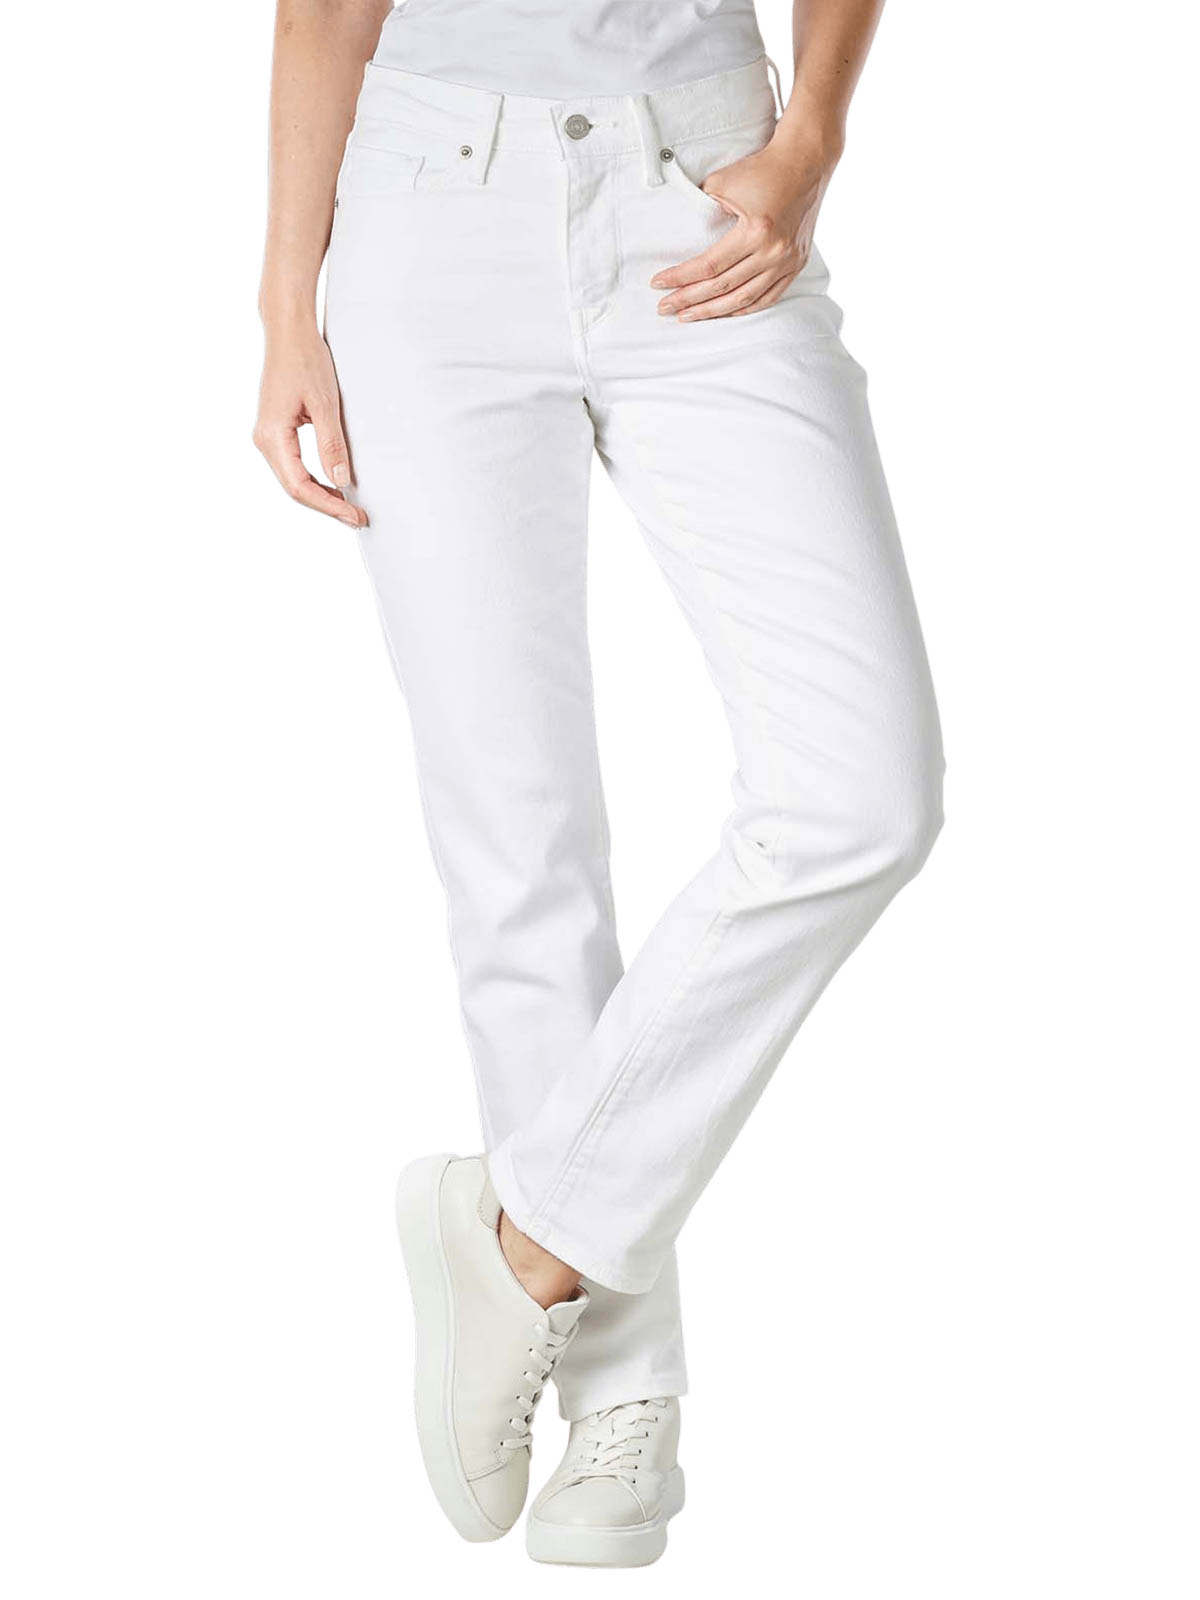 Levi's Classic Straight Jeans Simply White Levi's Women's Jeans | Free  Shipping on  - SIMPLY LOOK GOOD